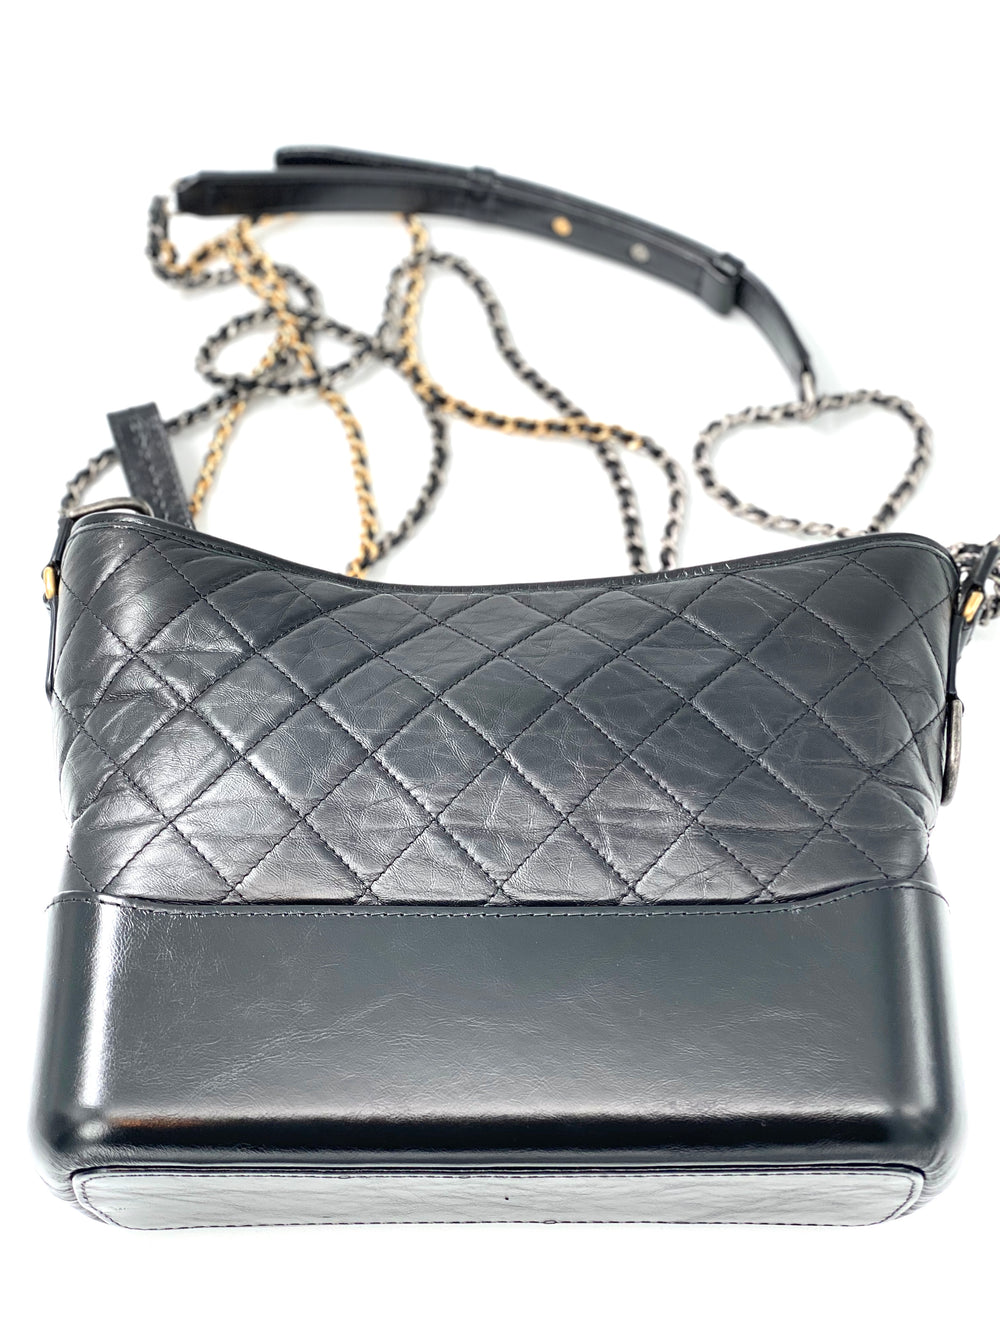 Chanel Gabrielle shoulder bag in black quilted leather